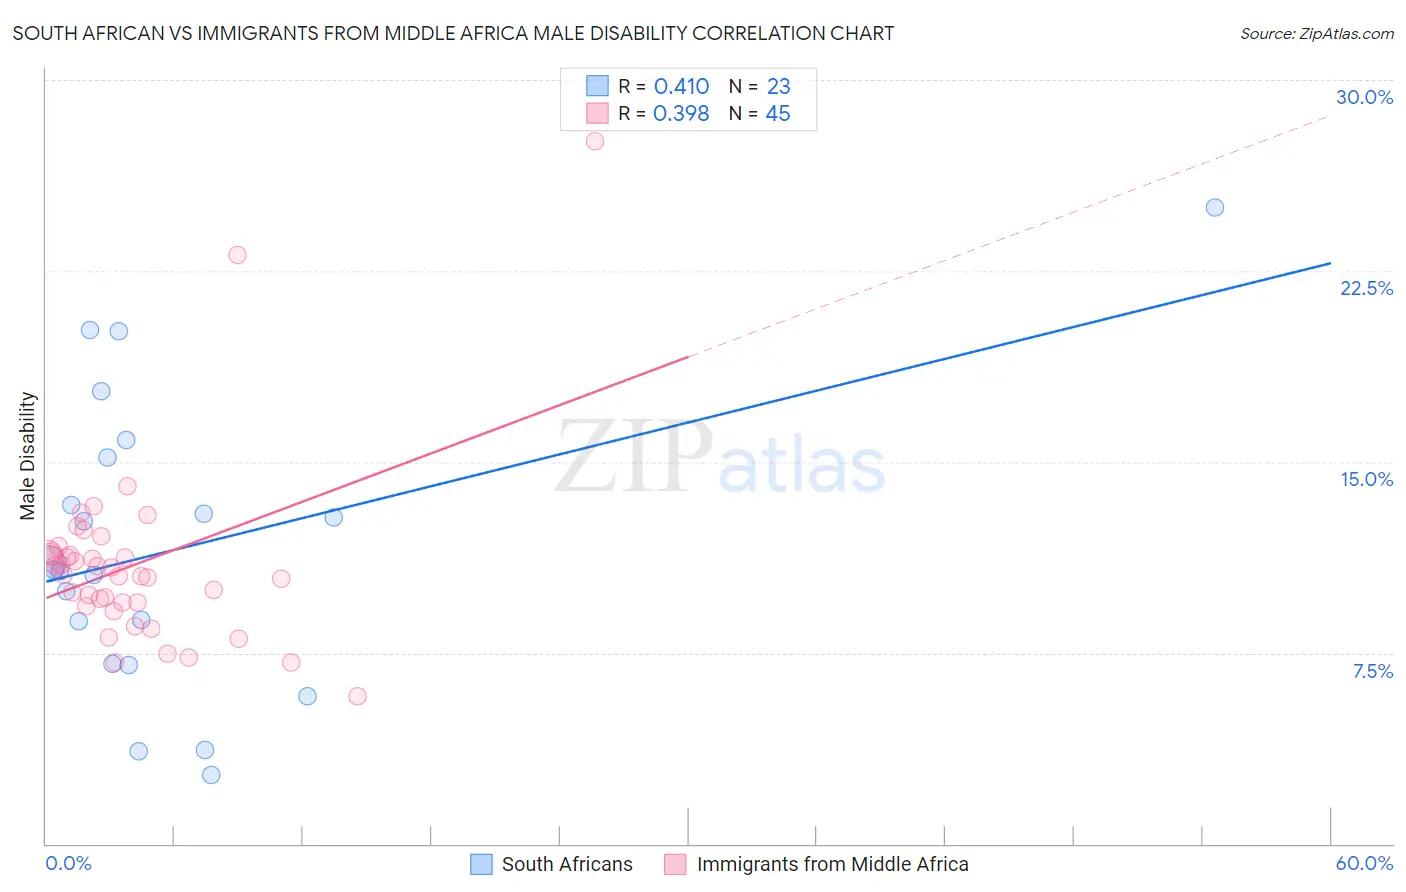 South African vs Immigrants from Middle Africa Male Disability